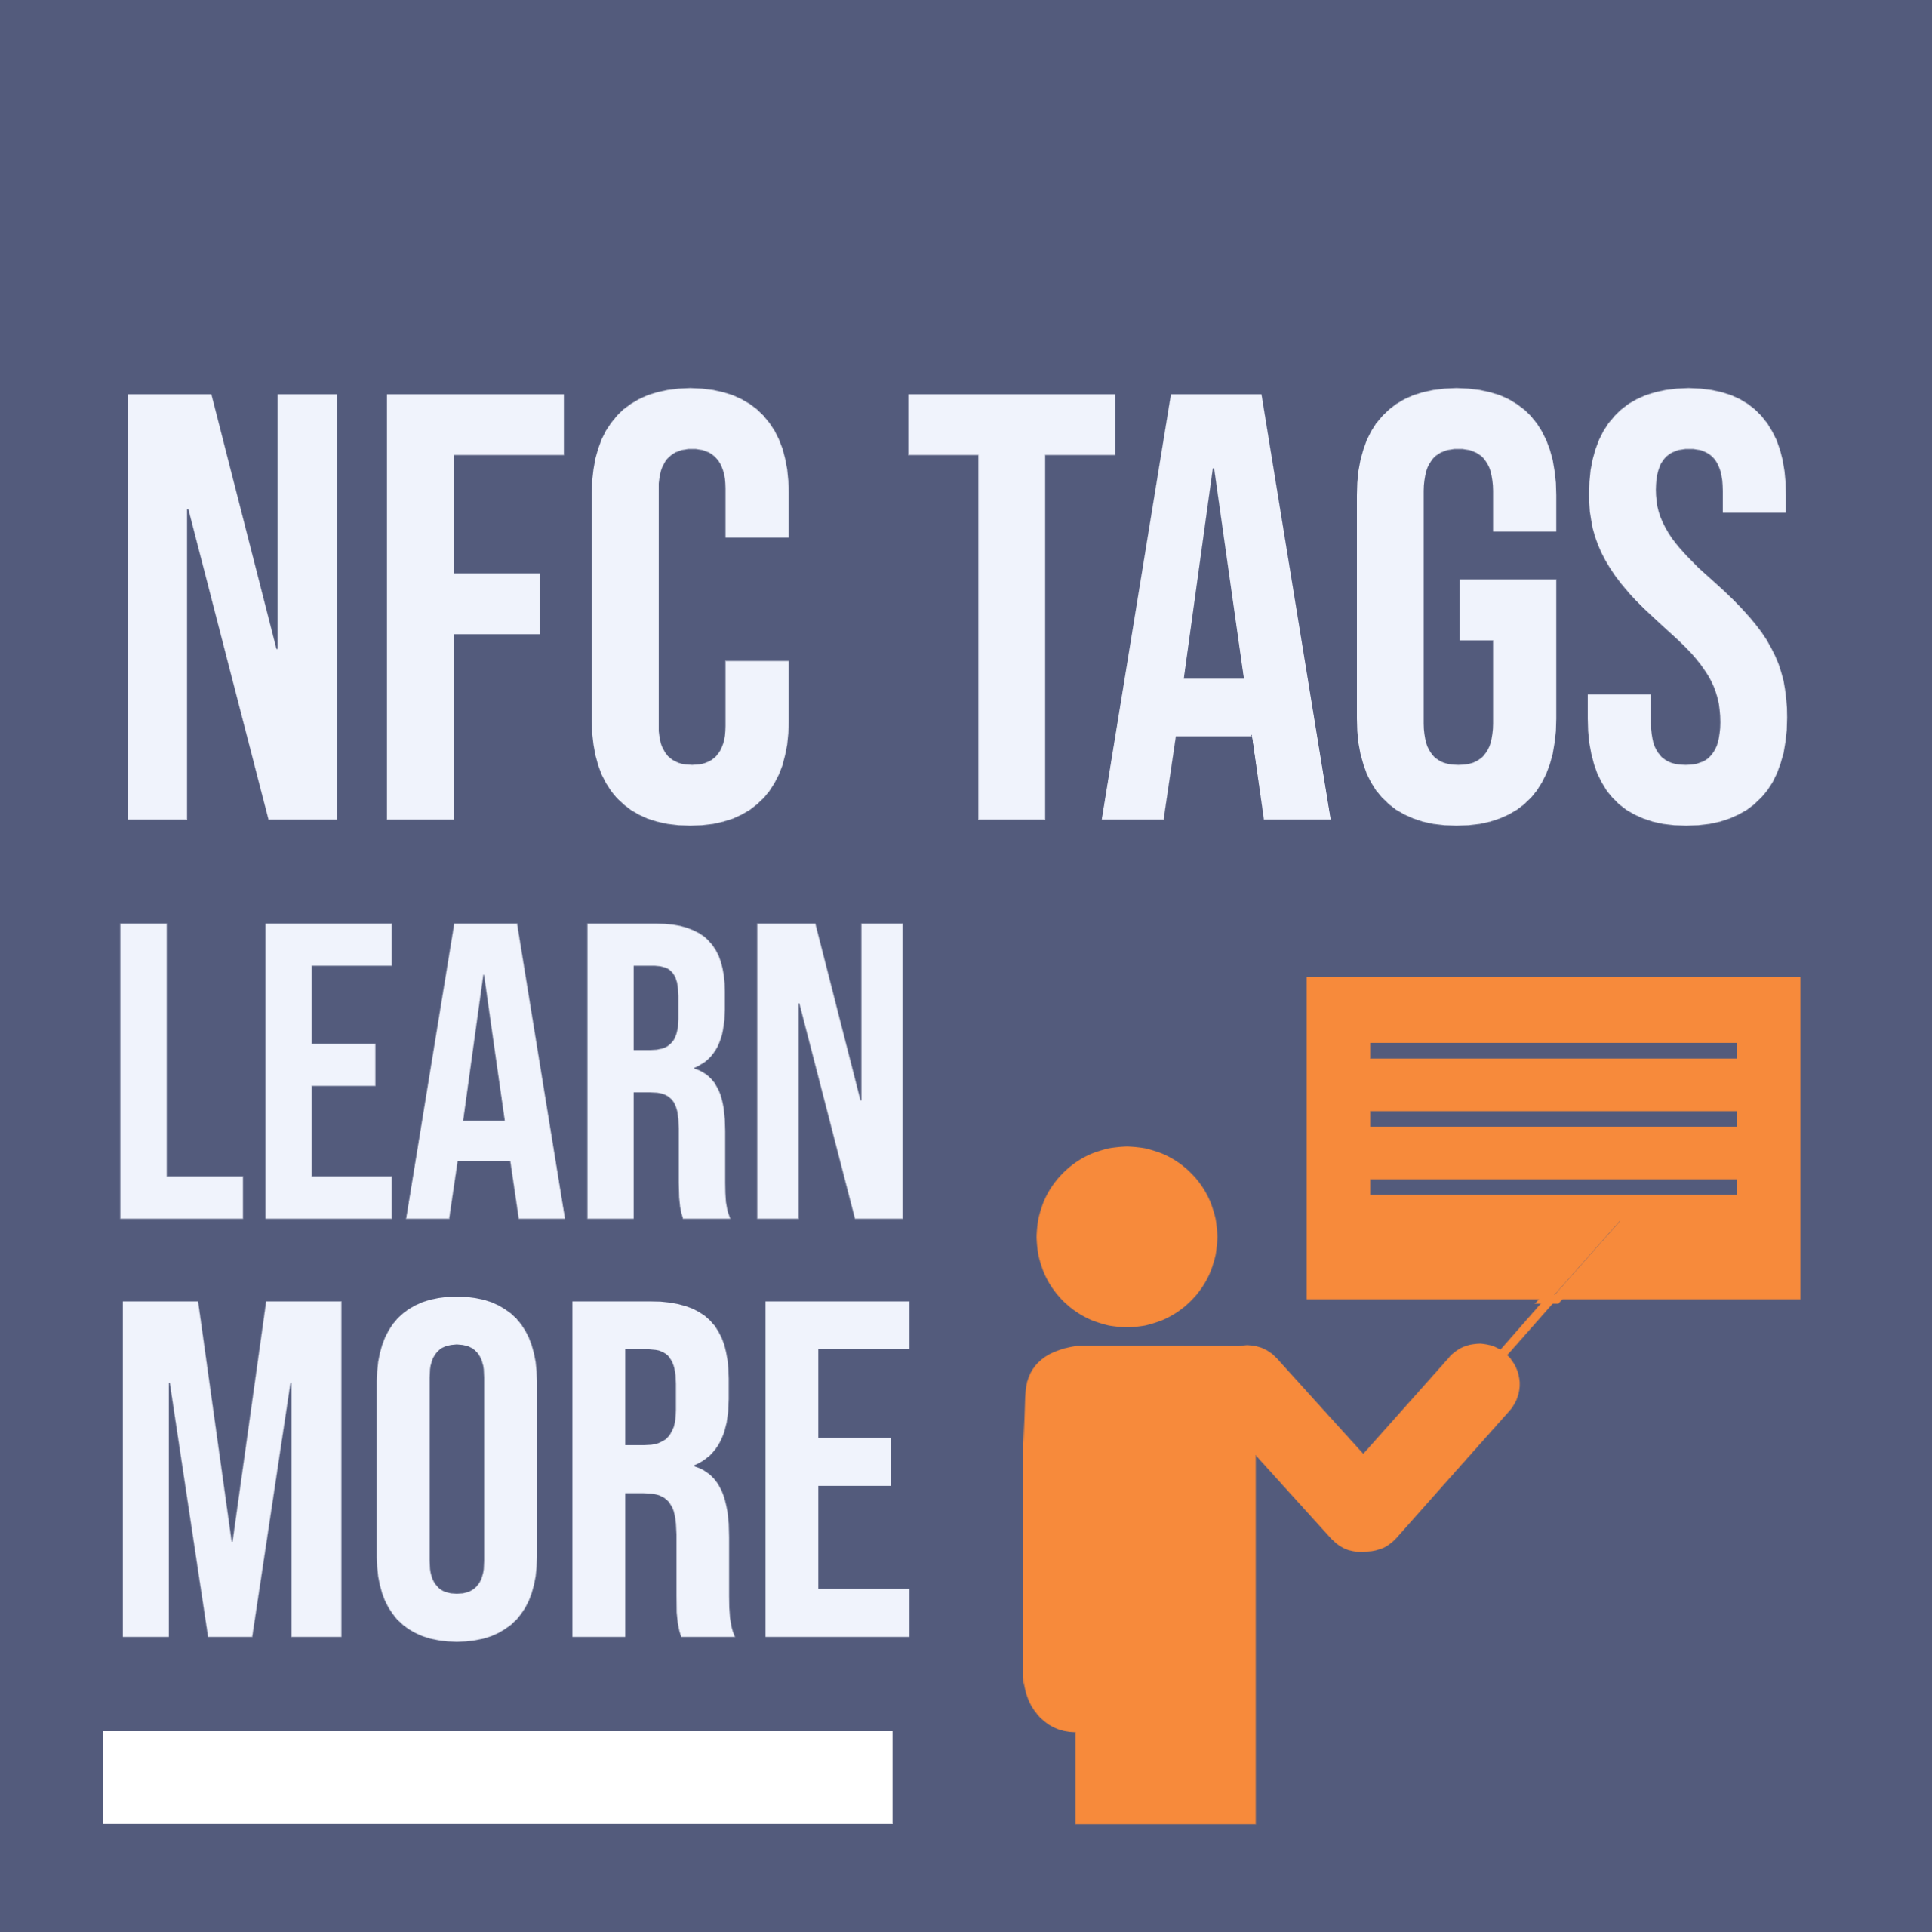 Best NFC Tags for Proof of Presence? Security Patrolling - Patrol Routes - Security Patrol - NFC Route